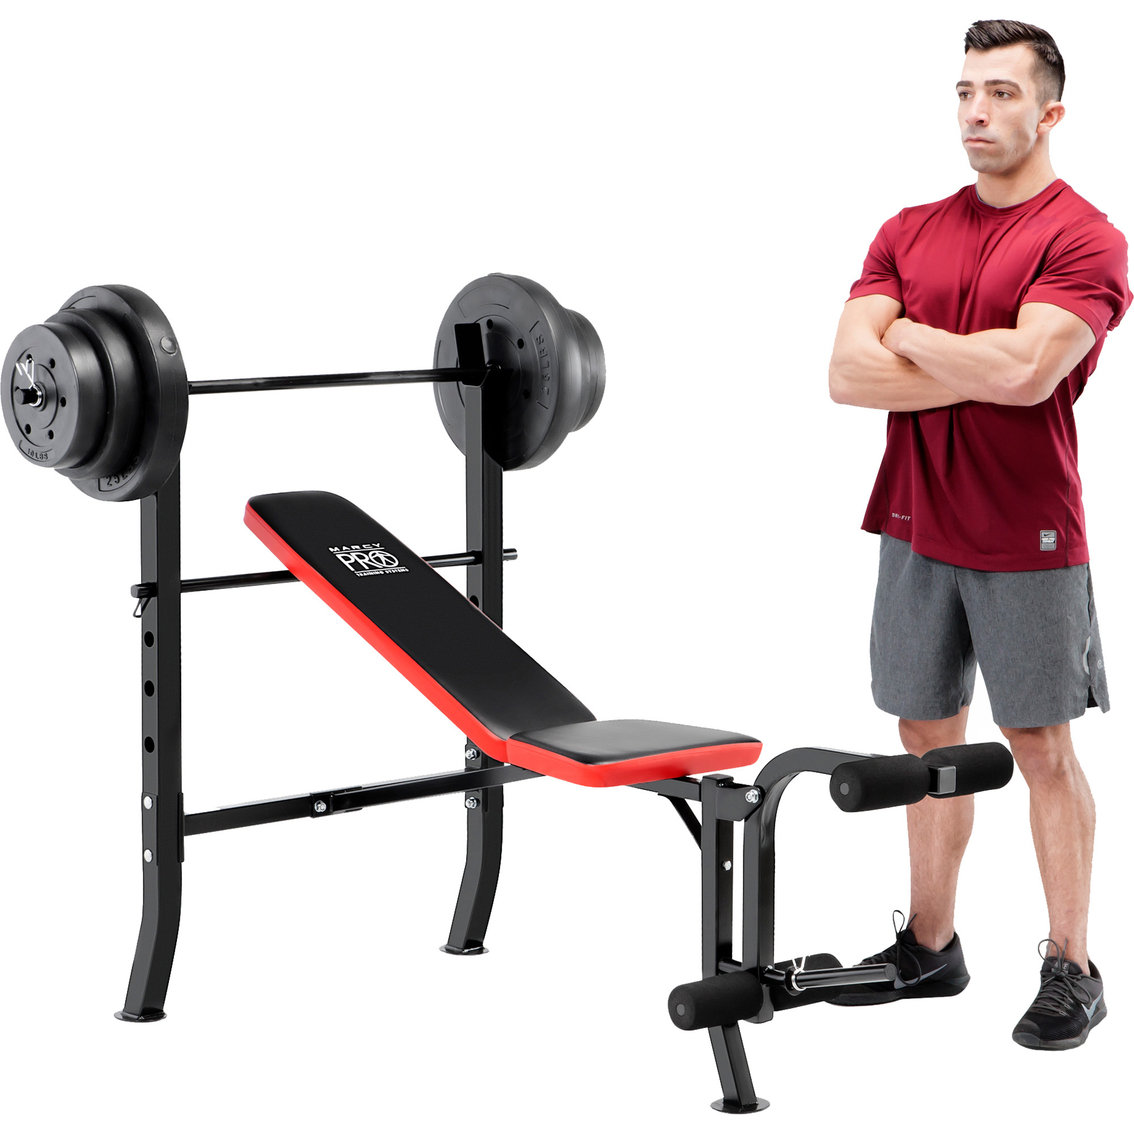 Marcy Standard Weight Bench with 100 lb. Weight Set - Image 2 of 6